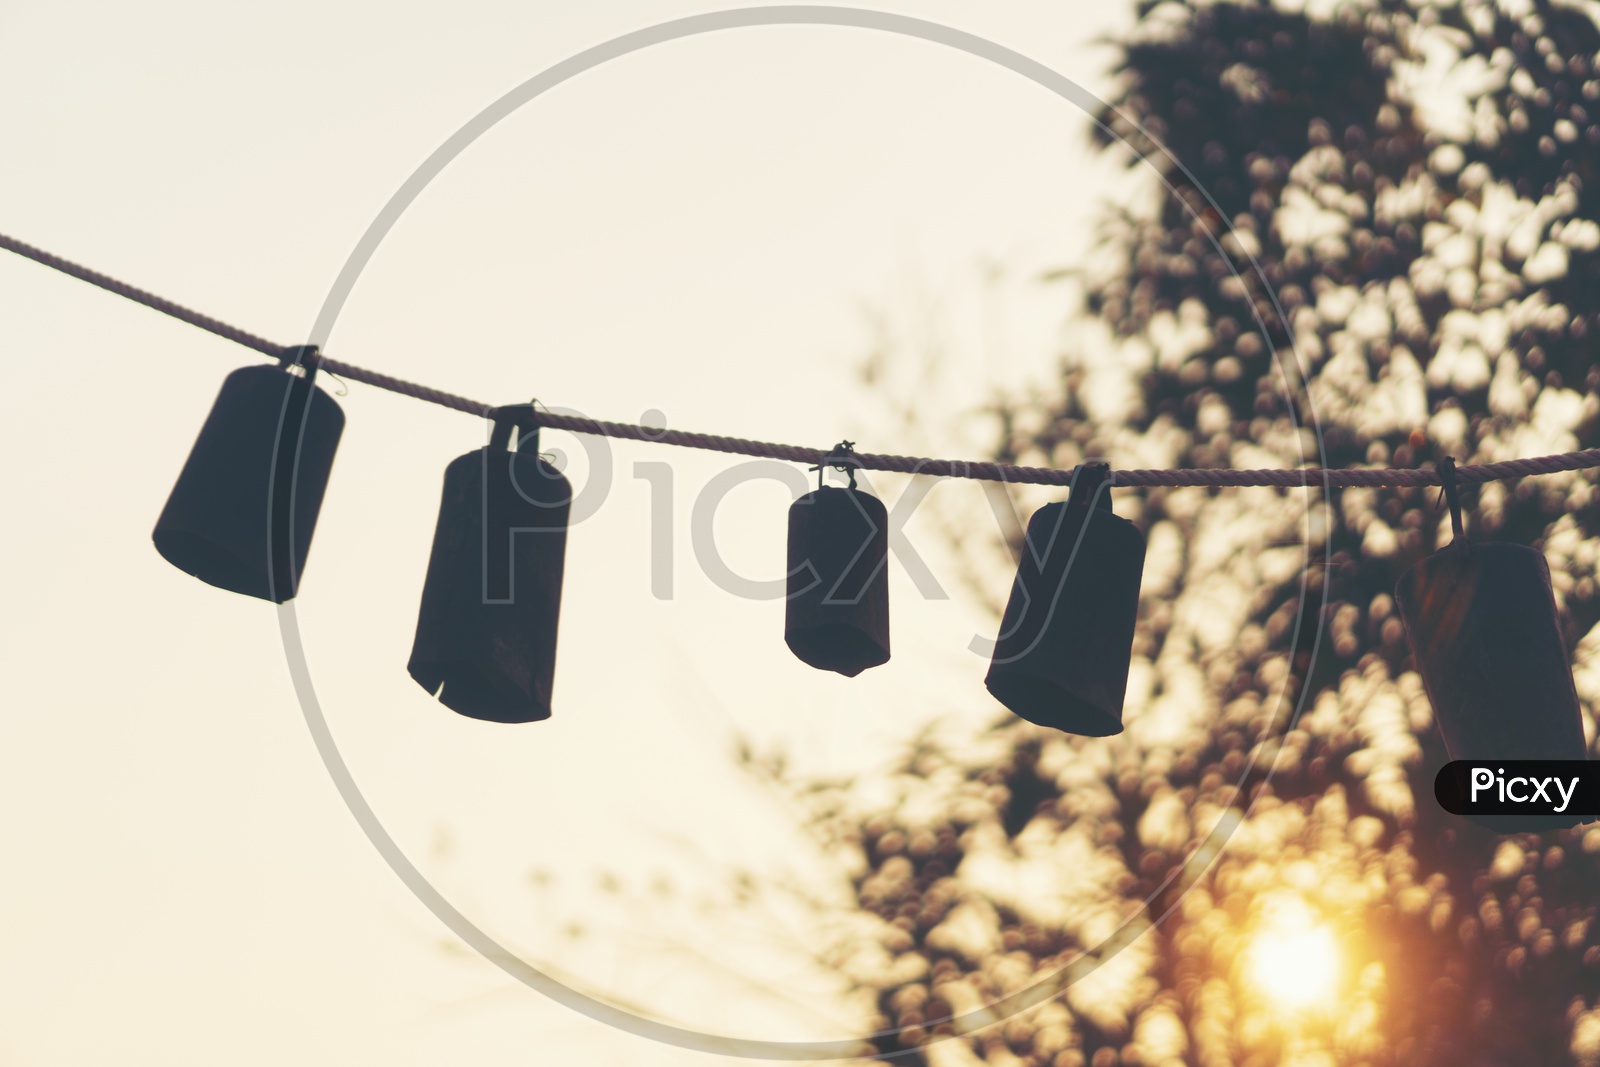 Bells Tagged To Rope With Sunset Luminous Light